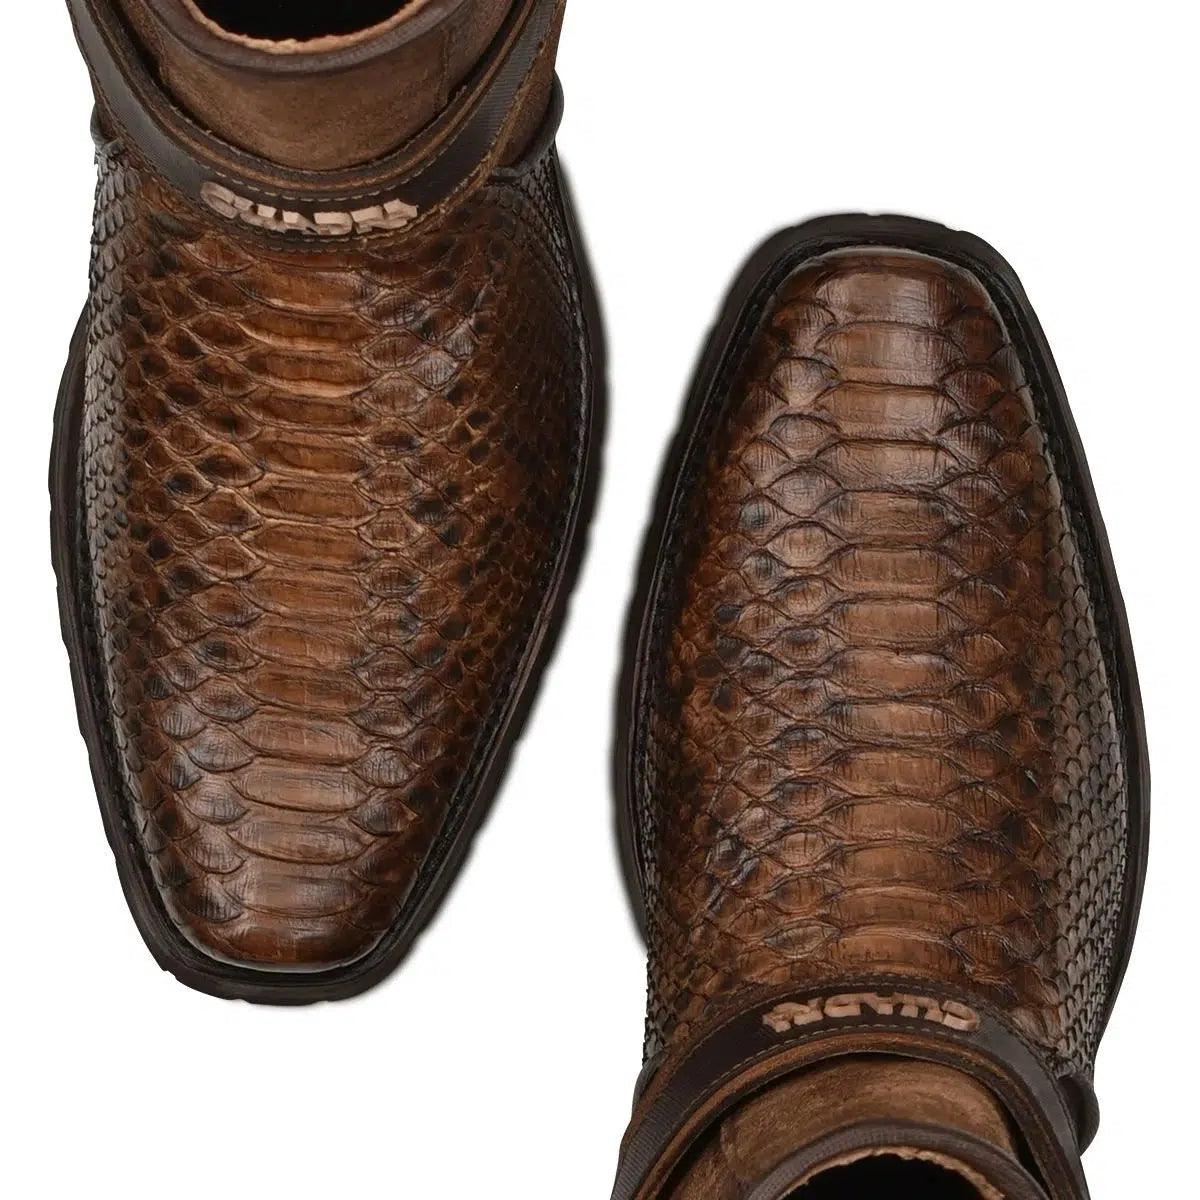 1J2LPH - Cuadra brown casual cowboy python skin zip ankle boots for men-Kuet.us